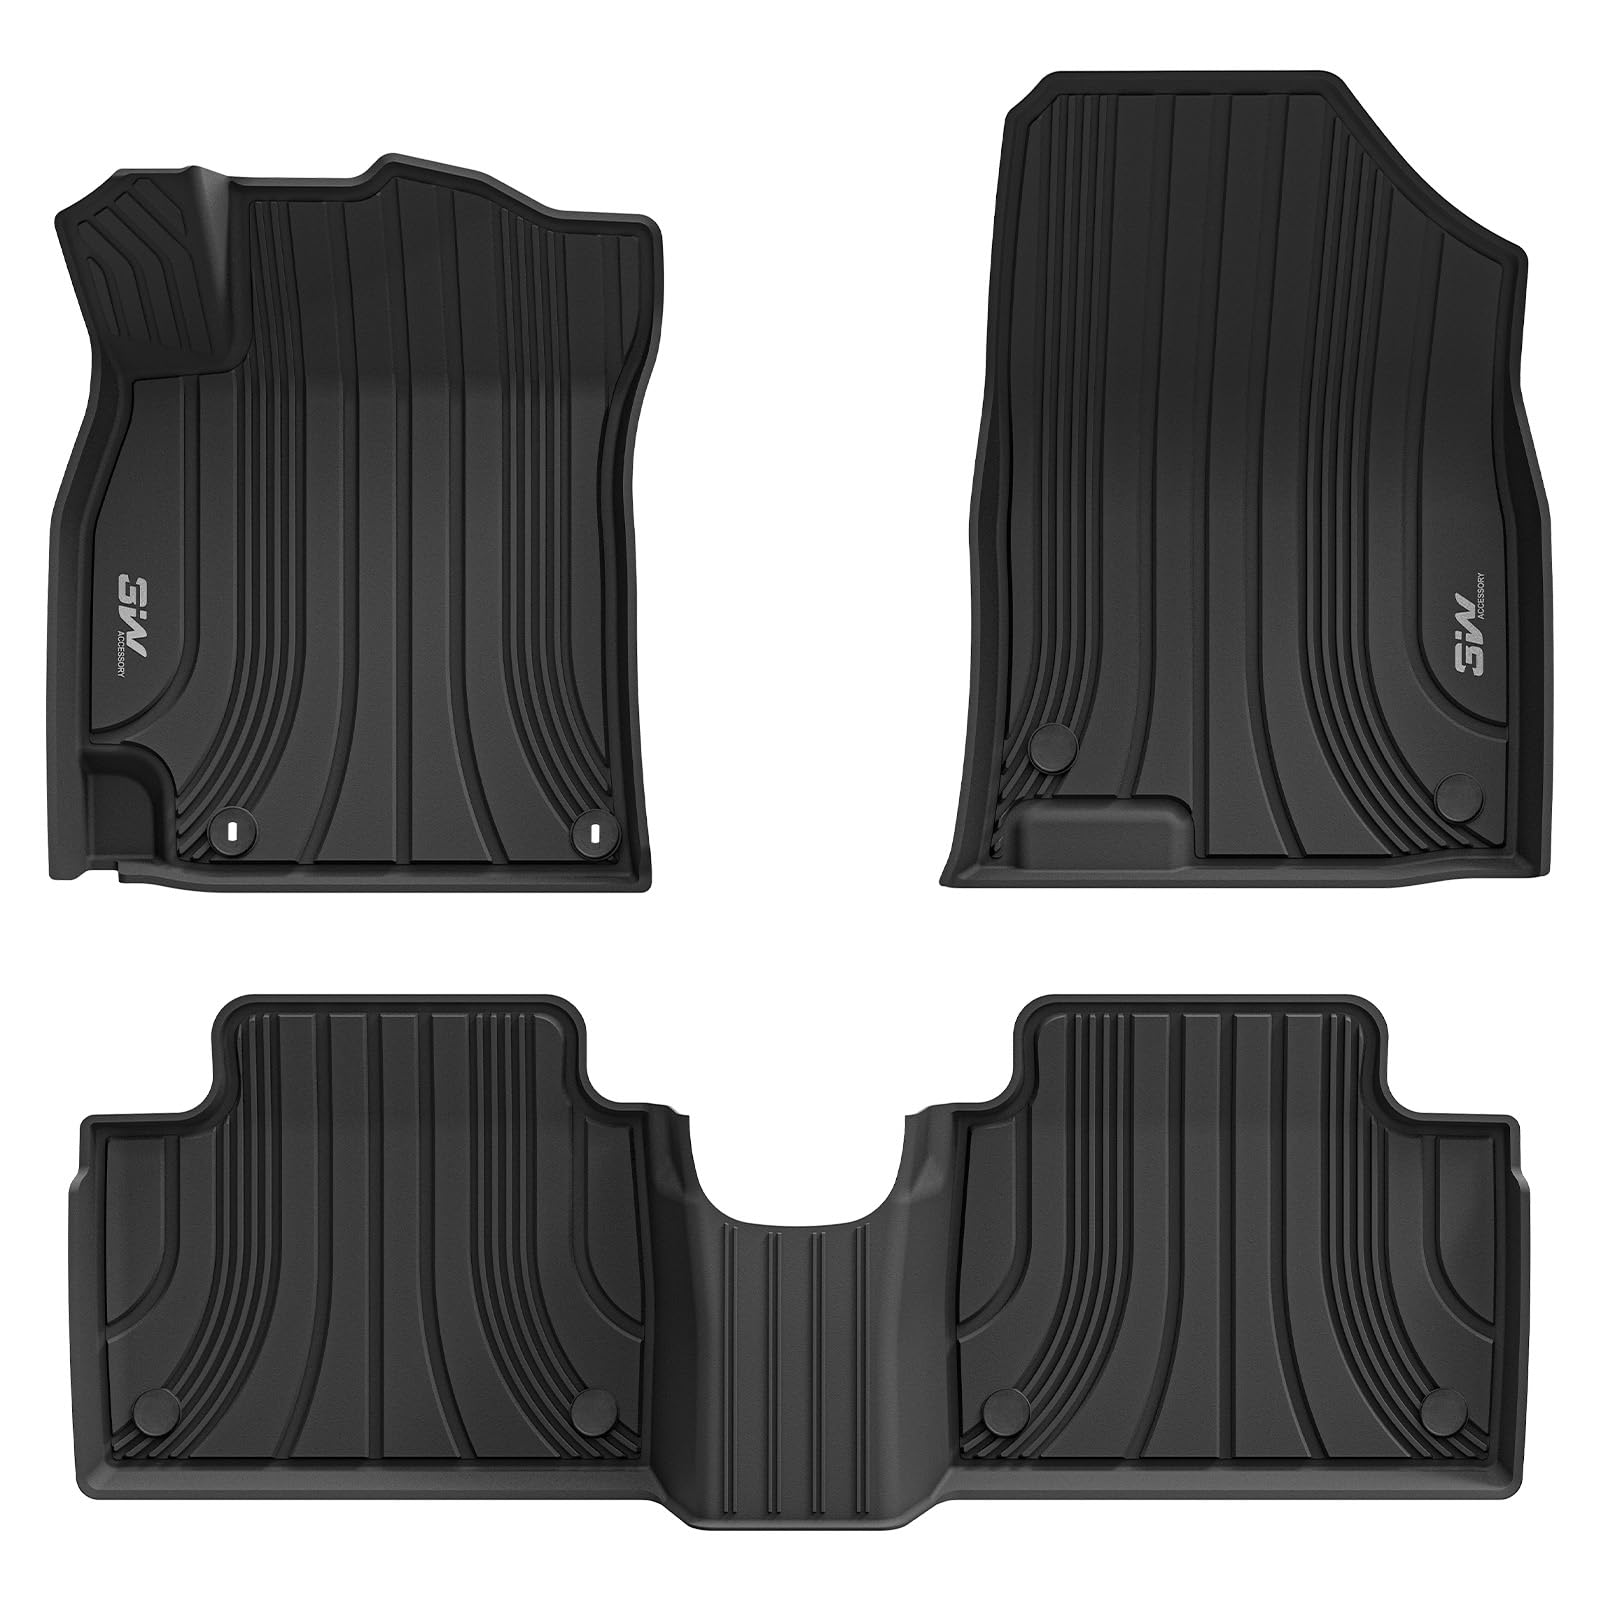 3W Hyundai Elantra 2021-2024 (Not for Hybrid or Elantra N) Custom Floor Mats TPE Material & All-Weather Protection Vehicles & Parts 3Wliners 2021-2024 Elantra 2021-2024 1st&2nd Row Mats